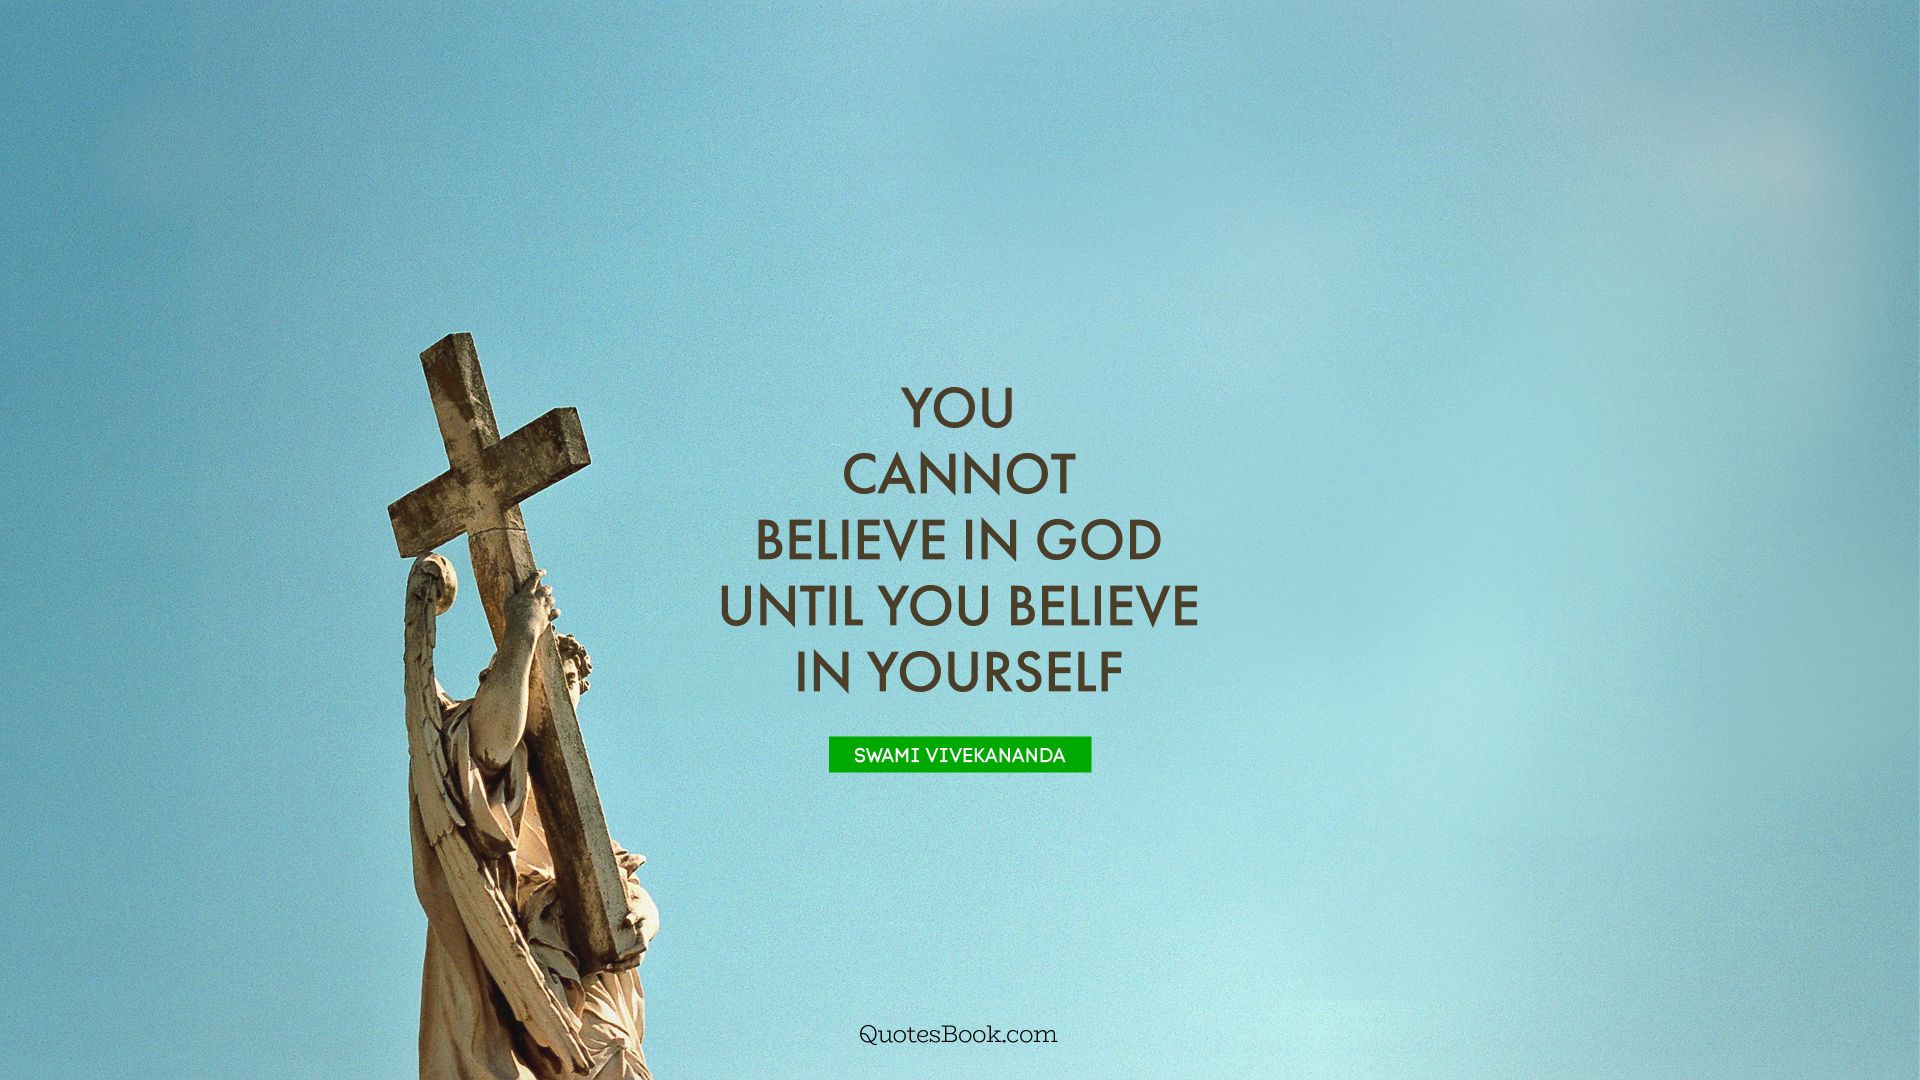 You cannot believe in God until you believe in yourself. - Quote by Swami Vivekananda